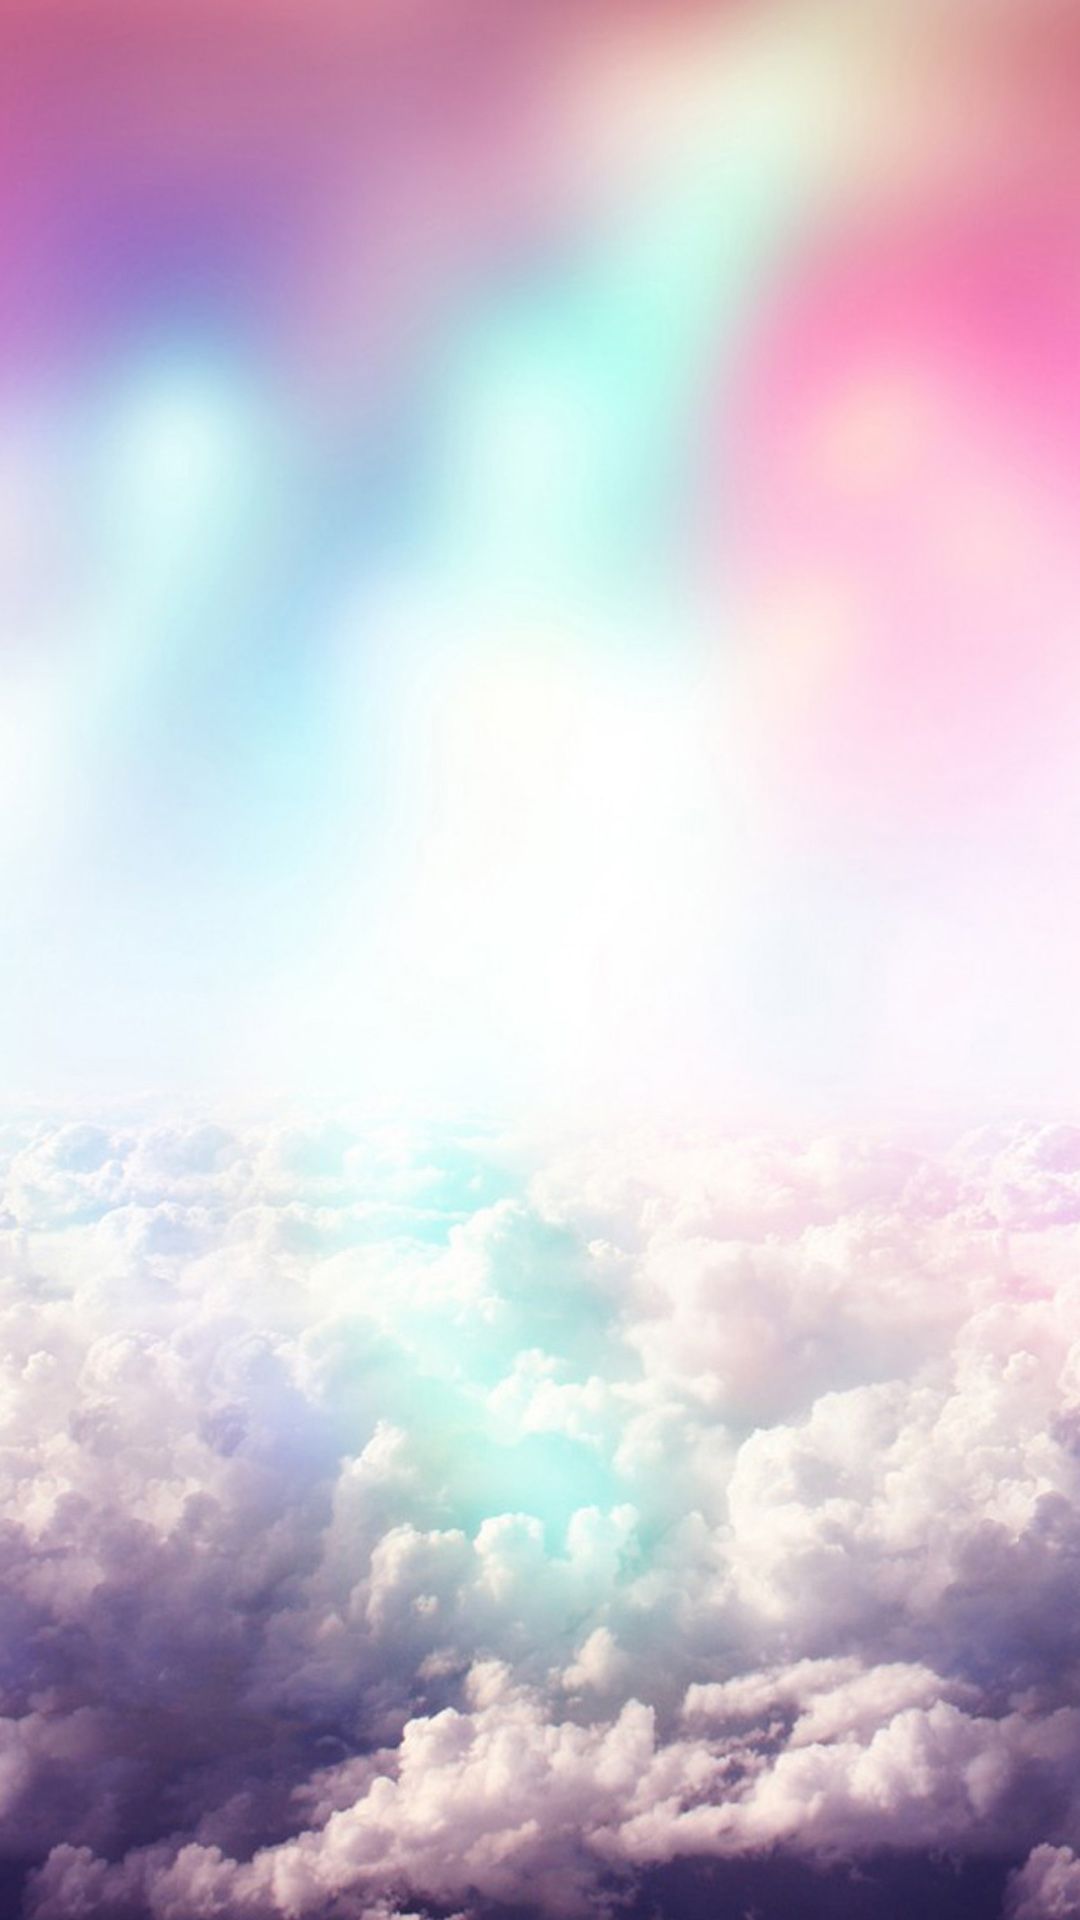 Rainbow Colors Over Fluffy Clouds Fantasy Android Wallpaper free download